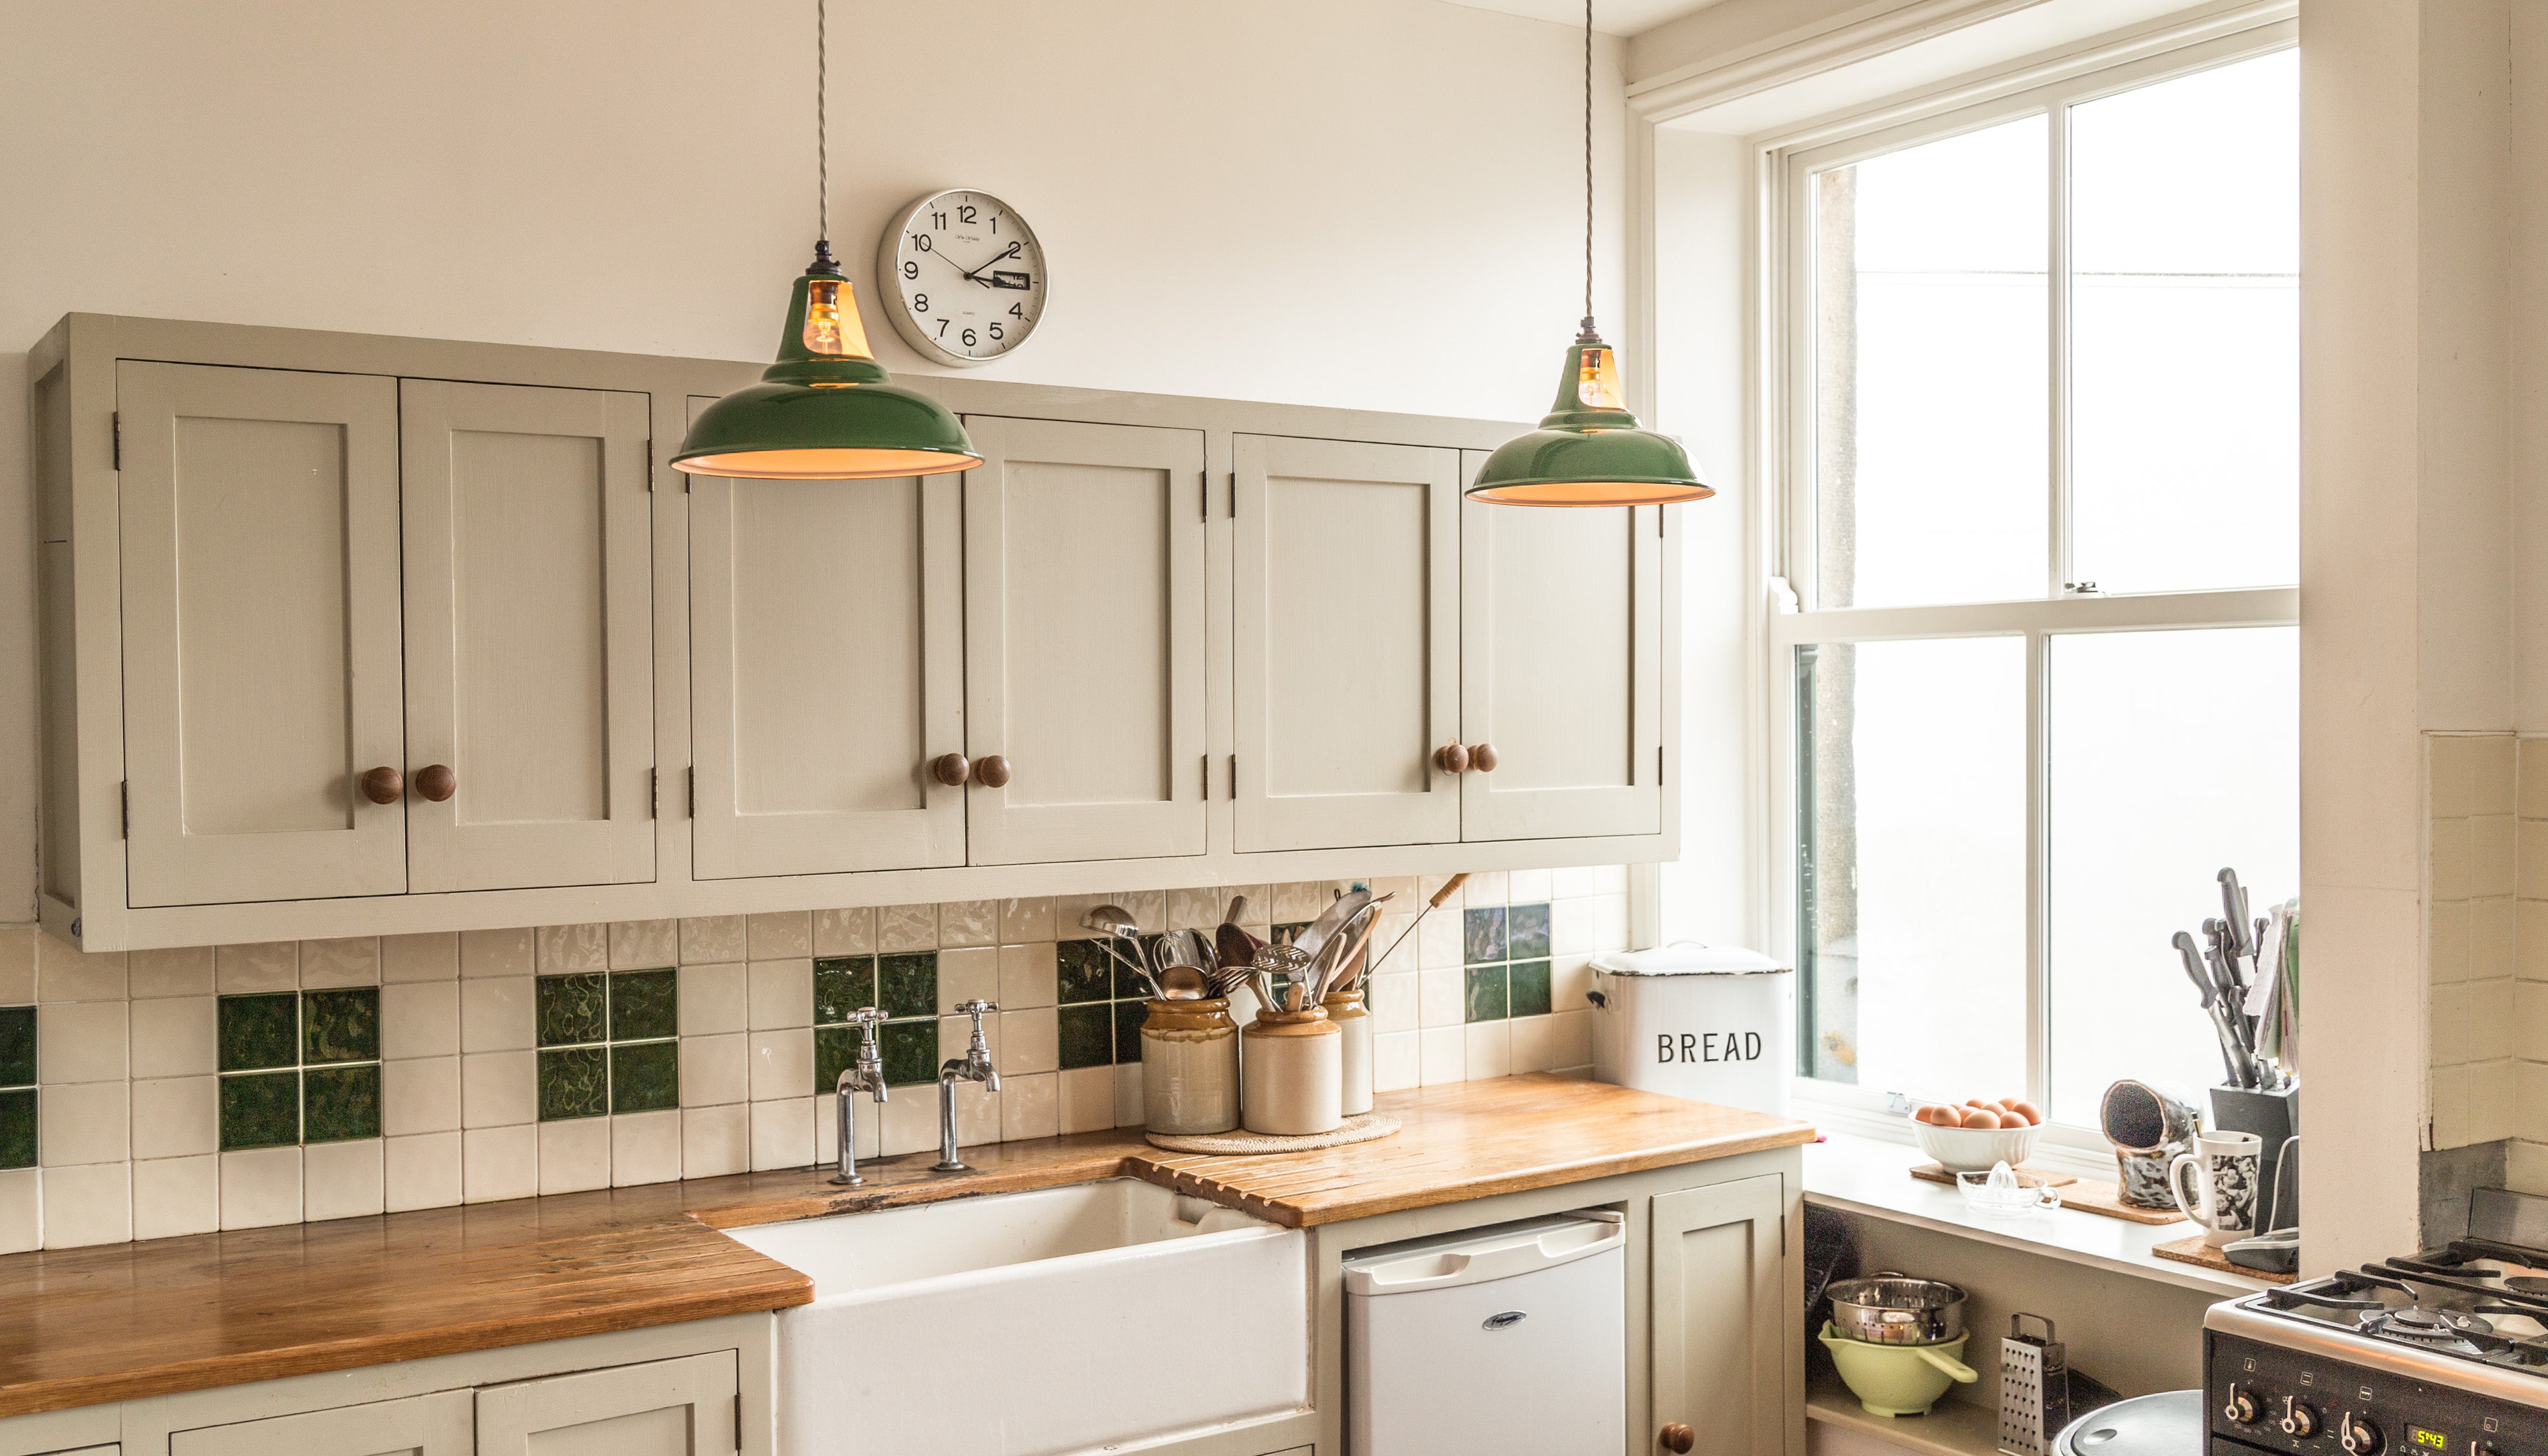 Ceiling Lights For Kitchen The Options Assessed Urban Cottage Industries